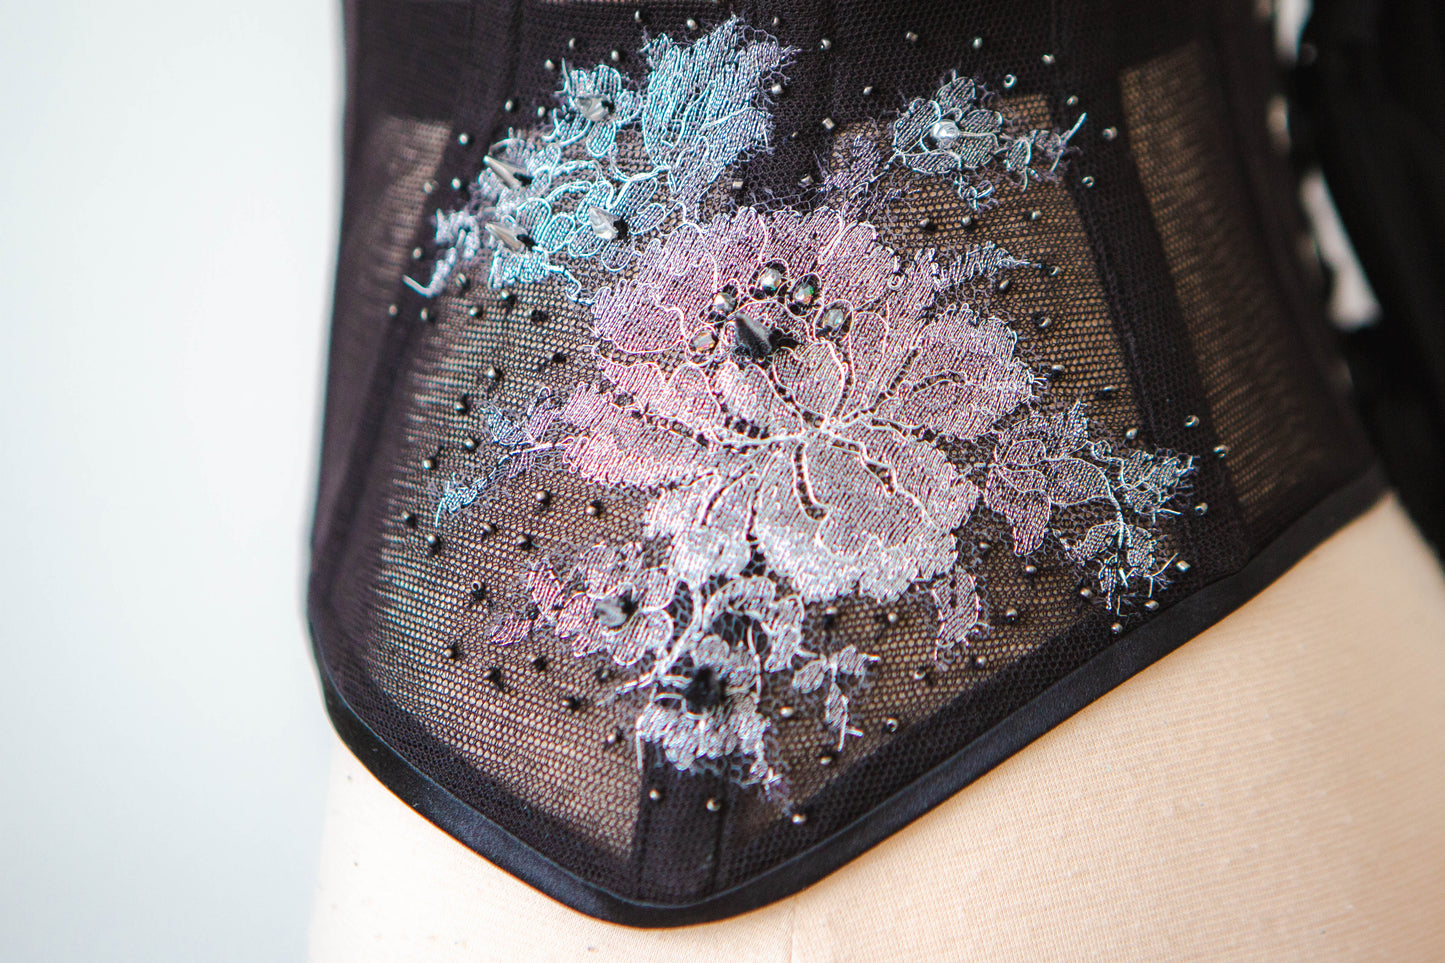 SAMPLE Tulle cincher with lace appliqué and beading - 23" waist